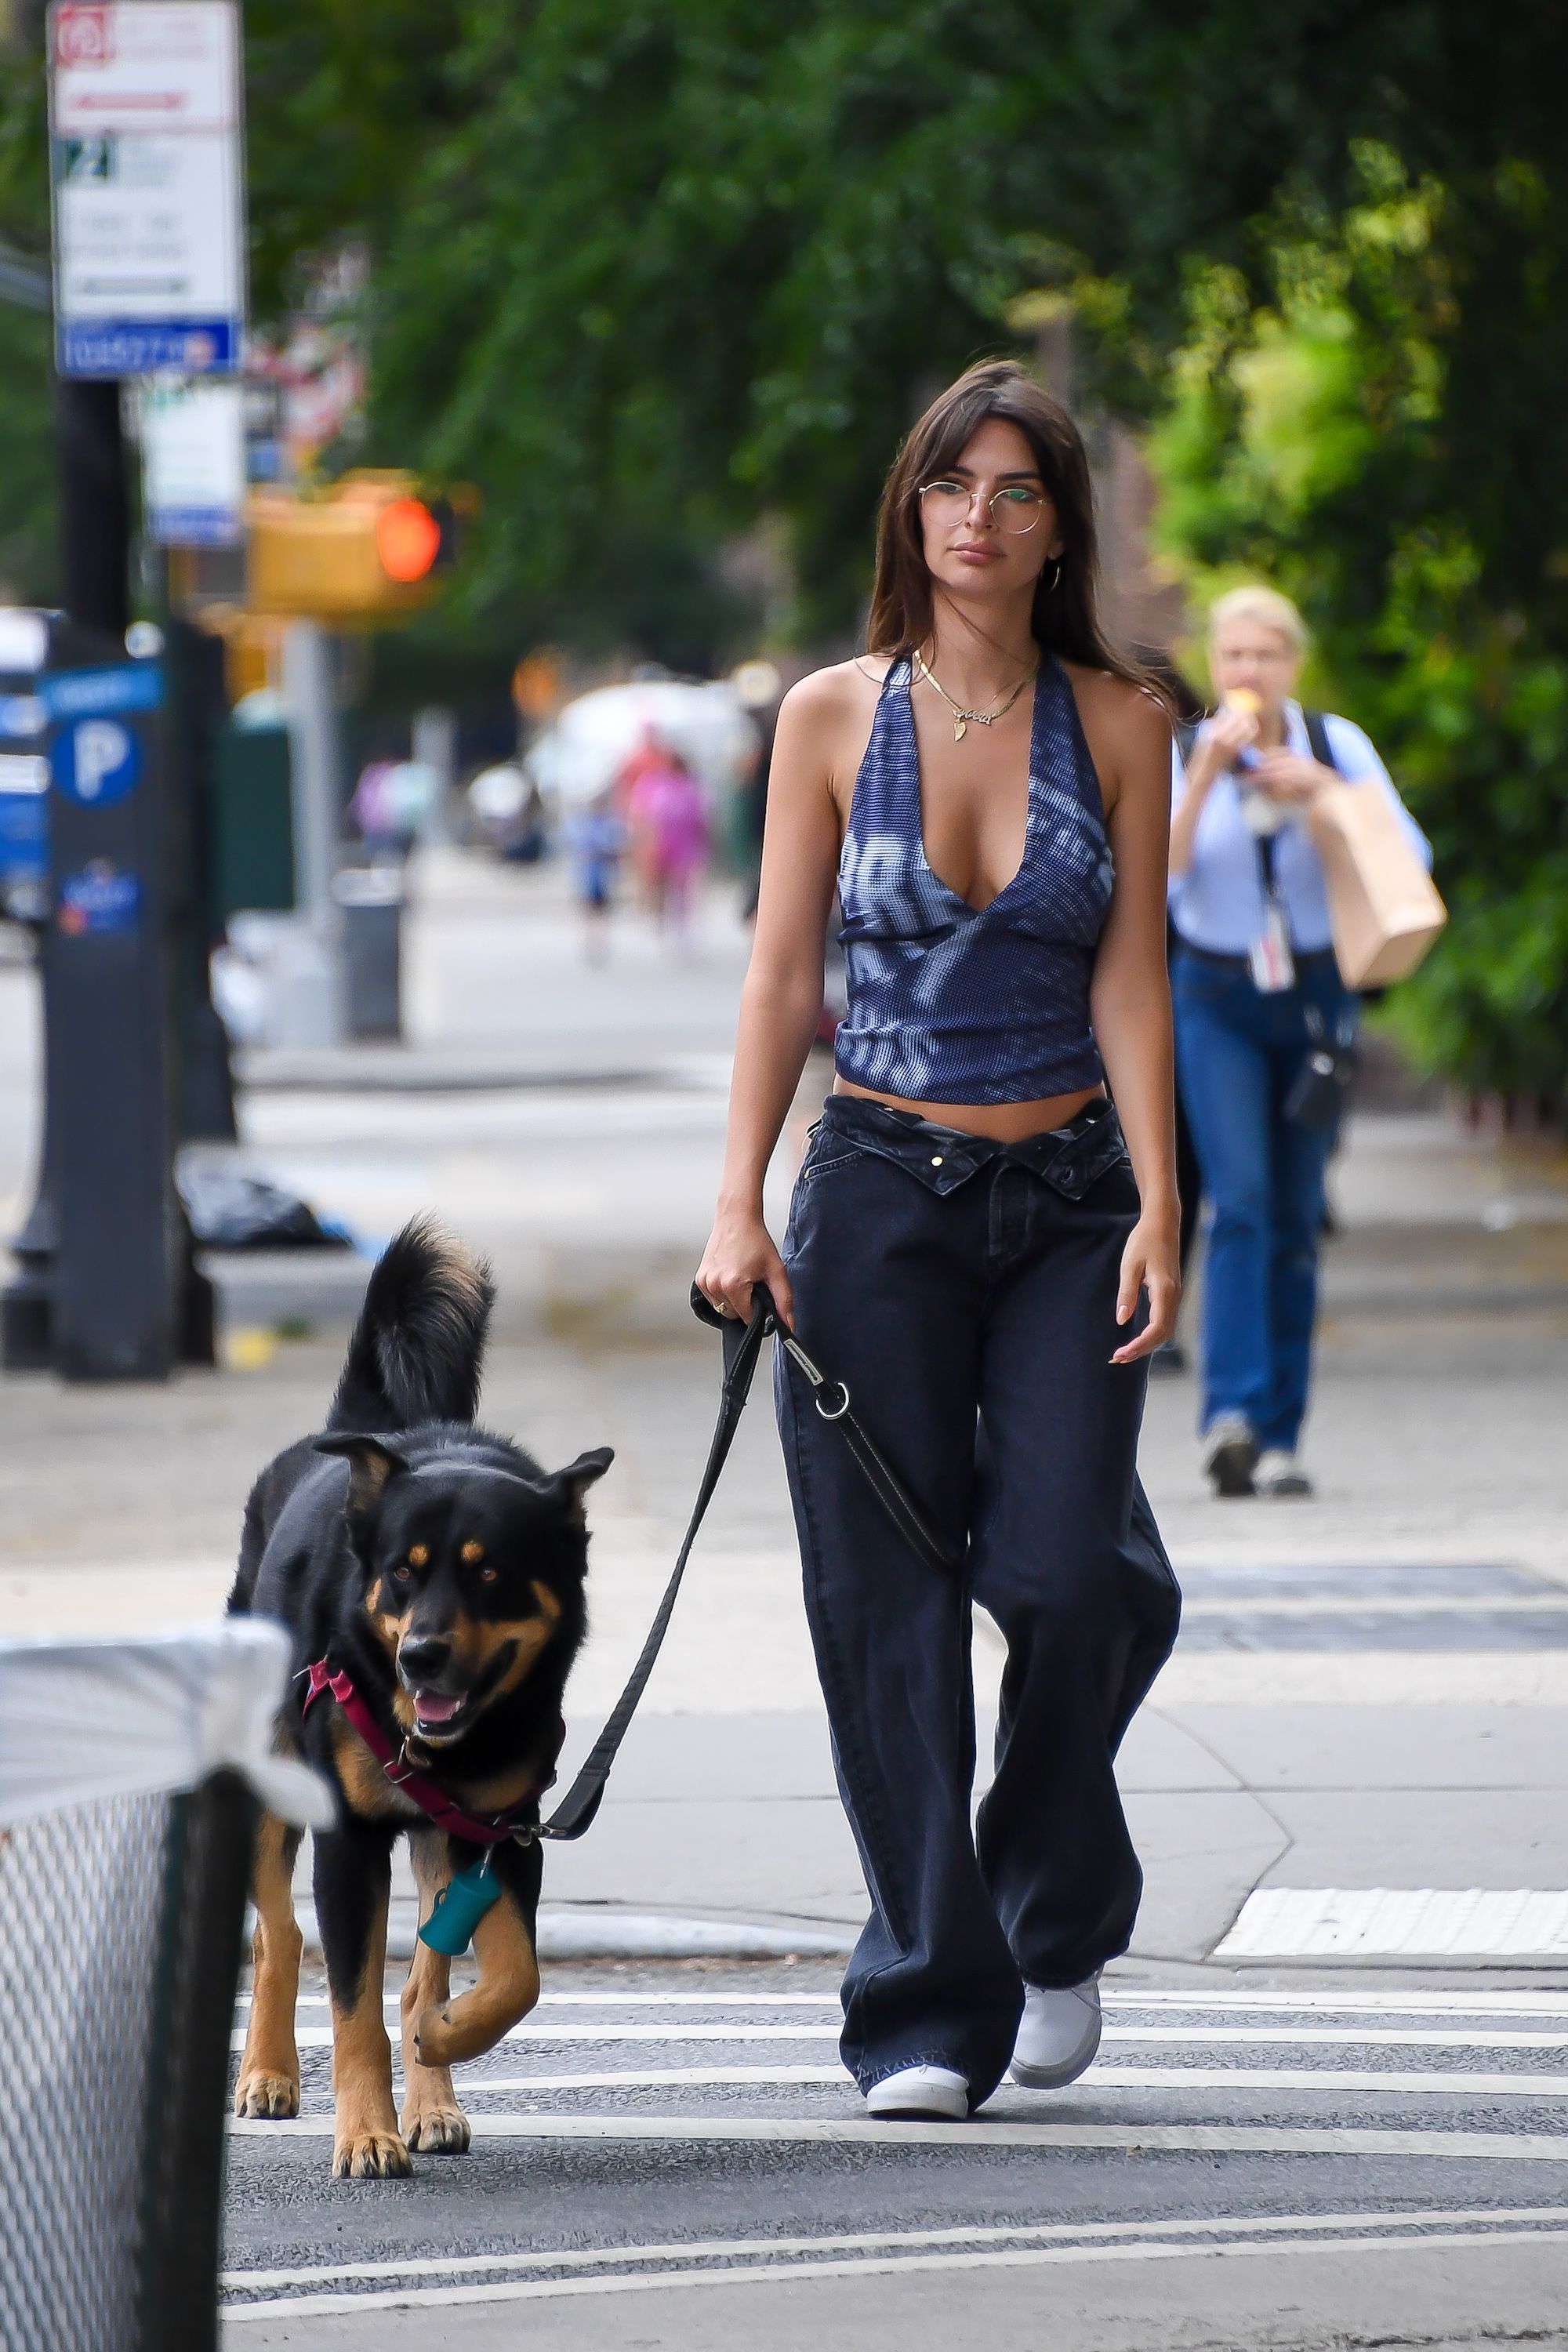 Emily Ratajkowski Goes Braless in a Low-Cut Top to Walk Her image pic